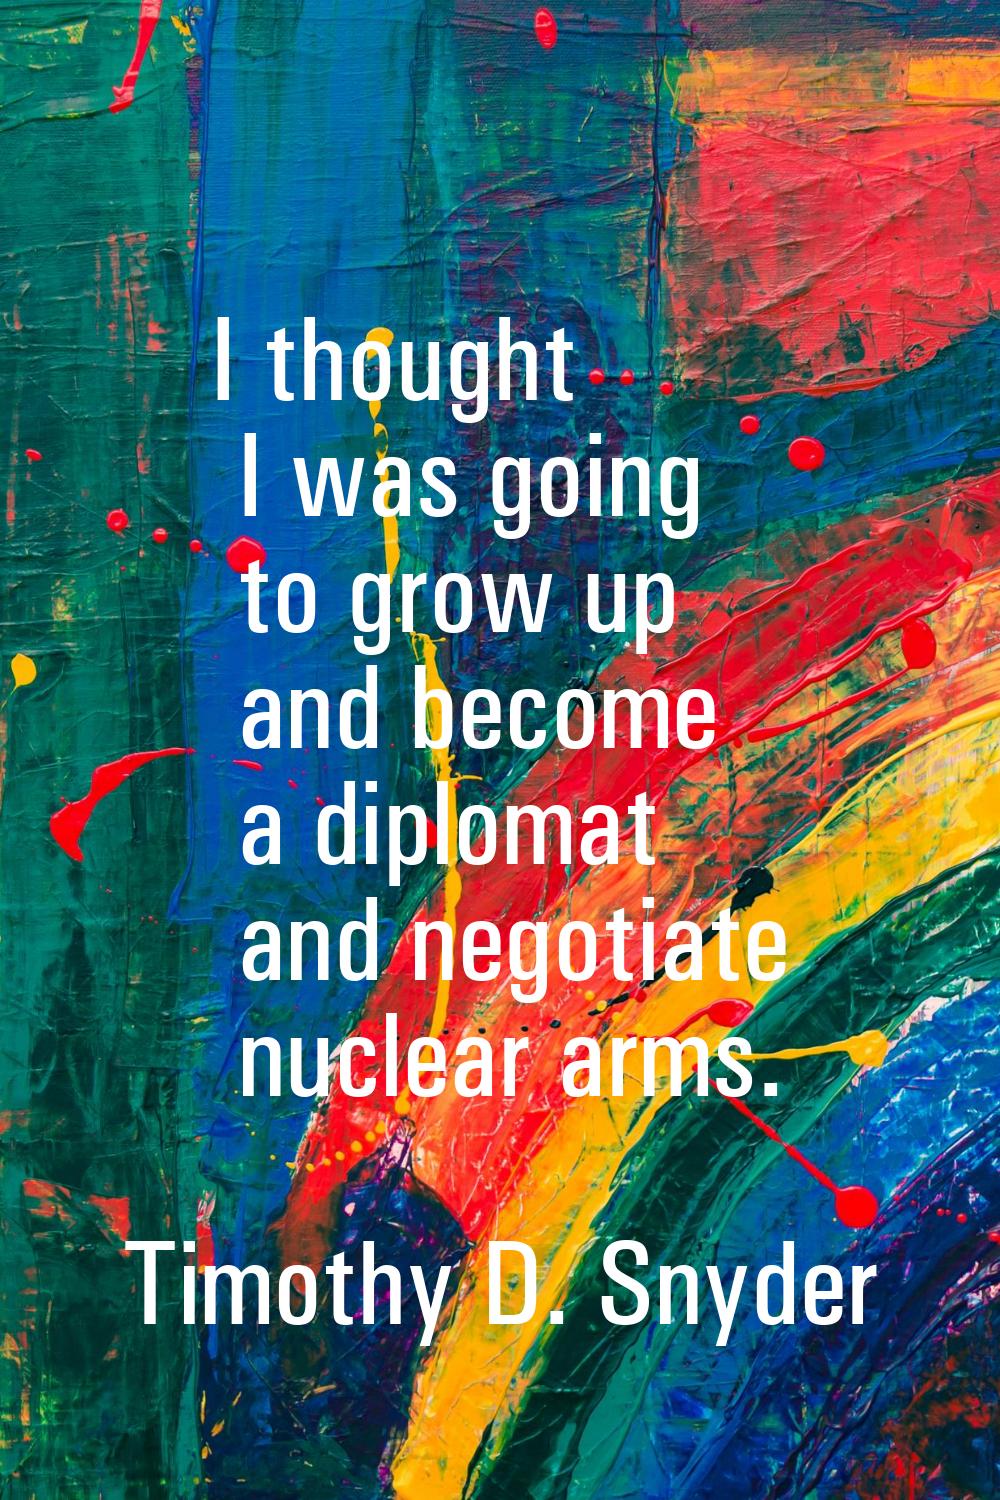 I thought I was going to grow up and become a diplomat and negotiate nuclear arms.